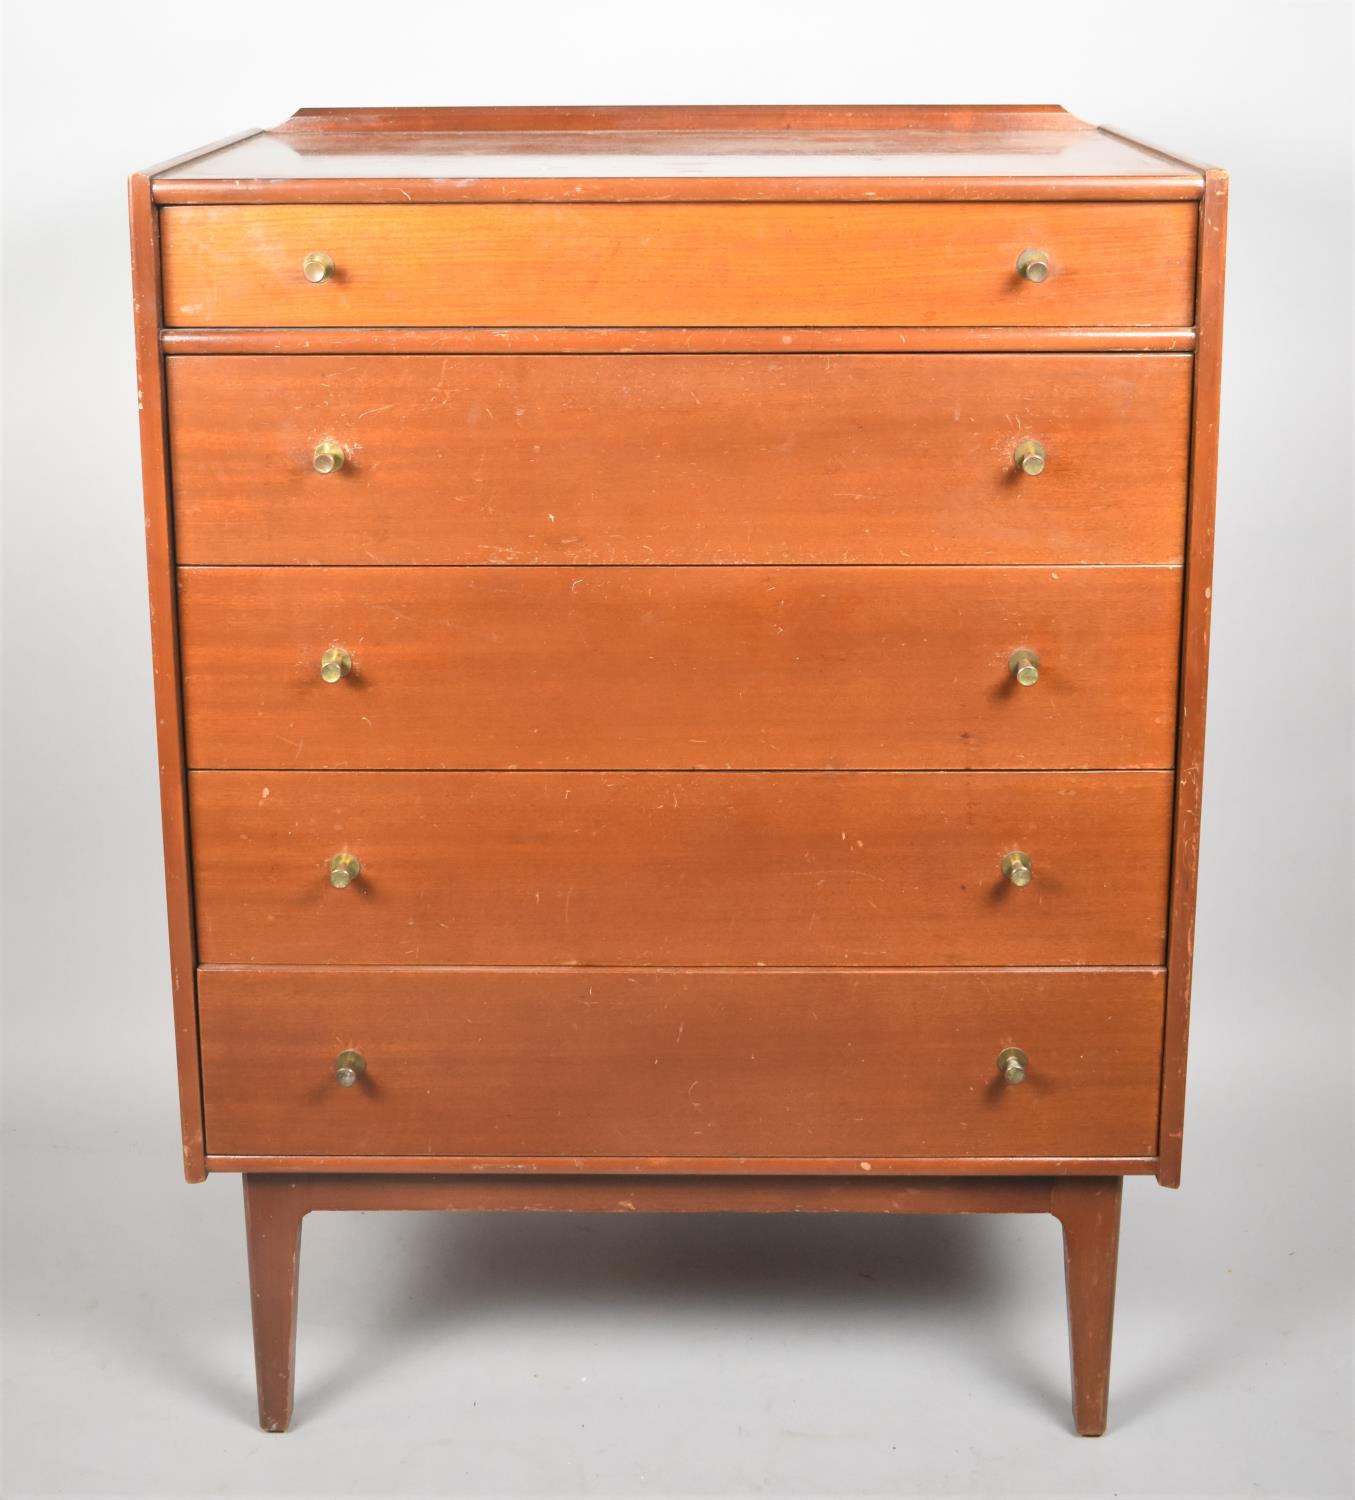 A 1970's William Lawrence Teak Bedroom Chest of Five Drawers with Brass Handles, 76cm wide